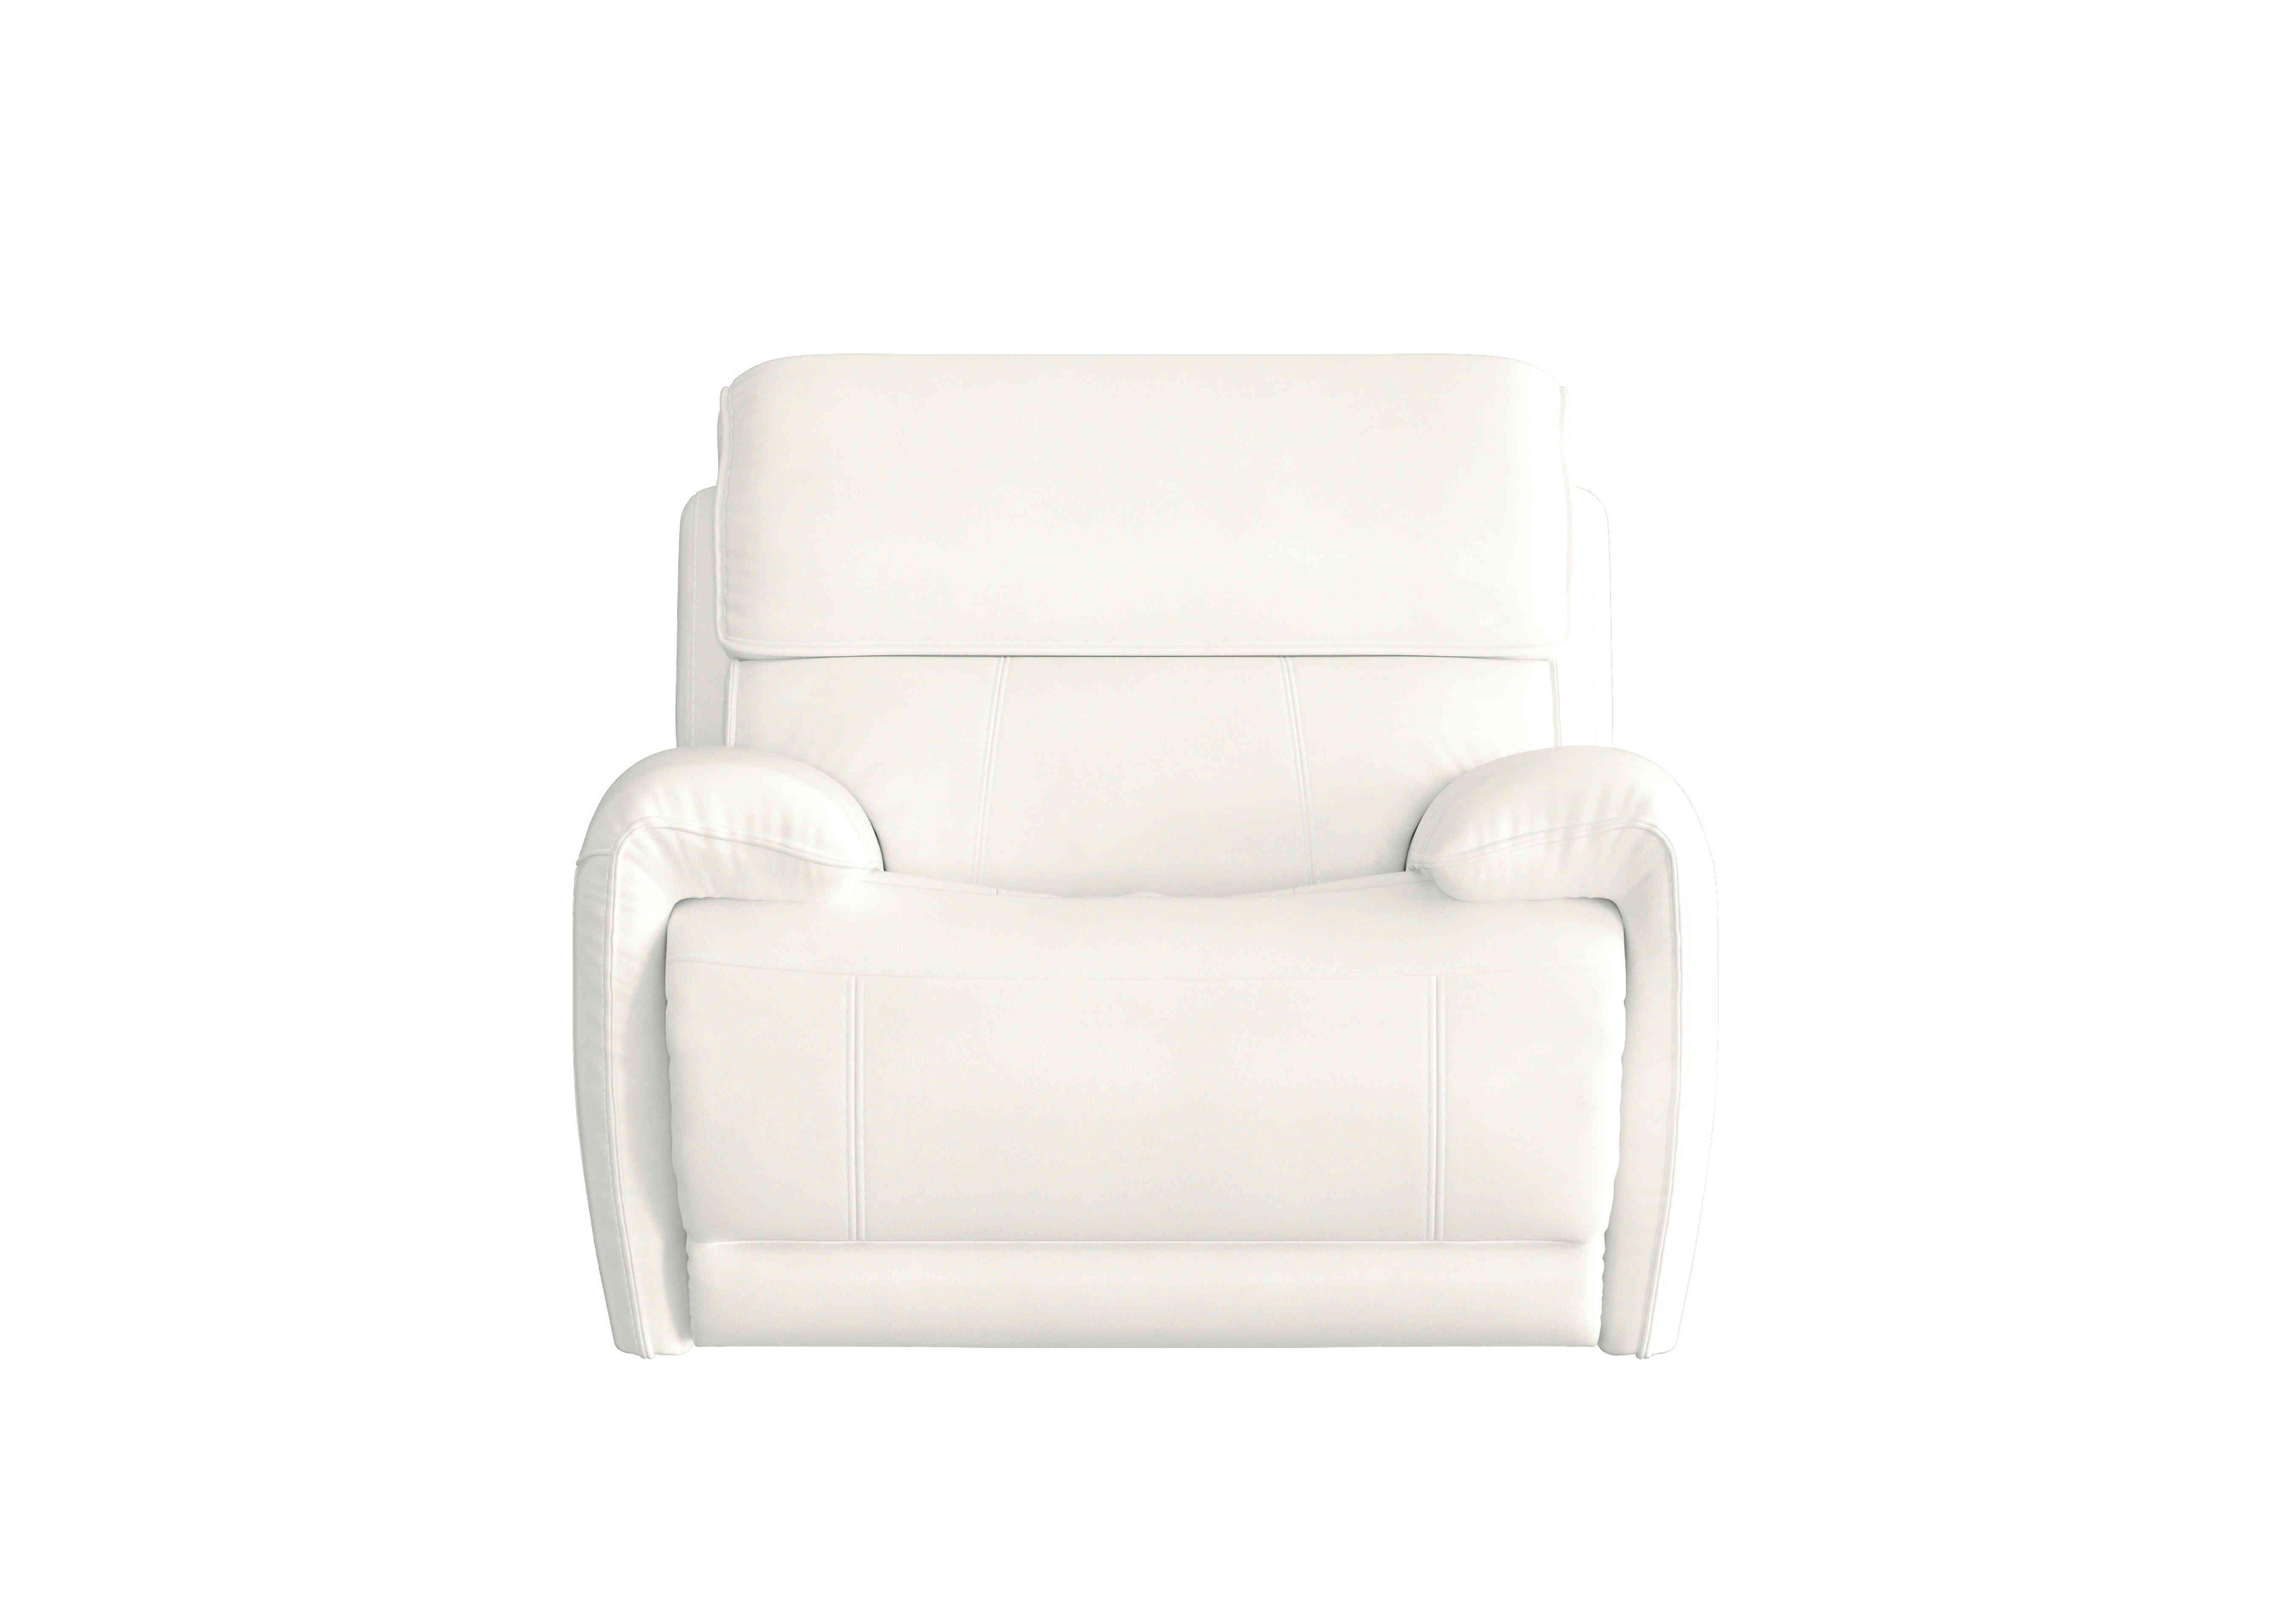 Link Leather Armchair in Bv-744d Star White on Furniture Village